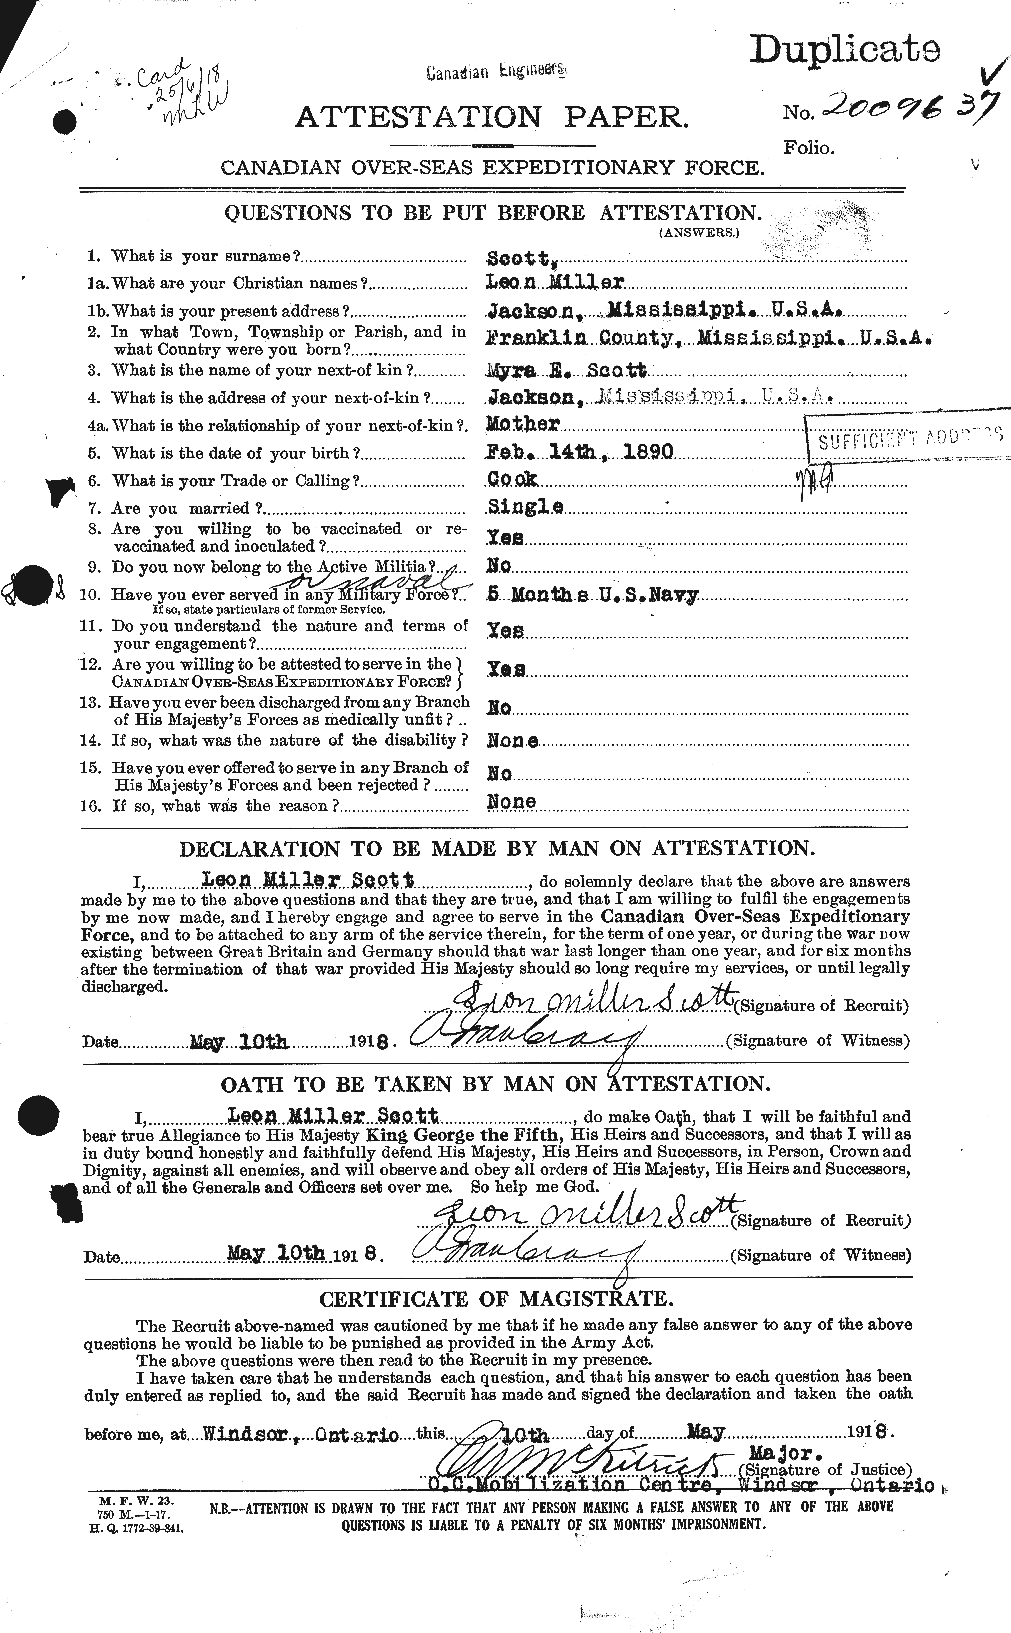 Personnel Records of the First World War - CEF 084142a